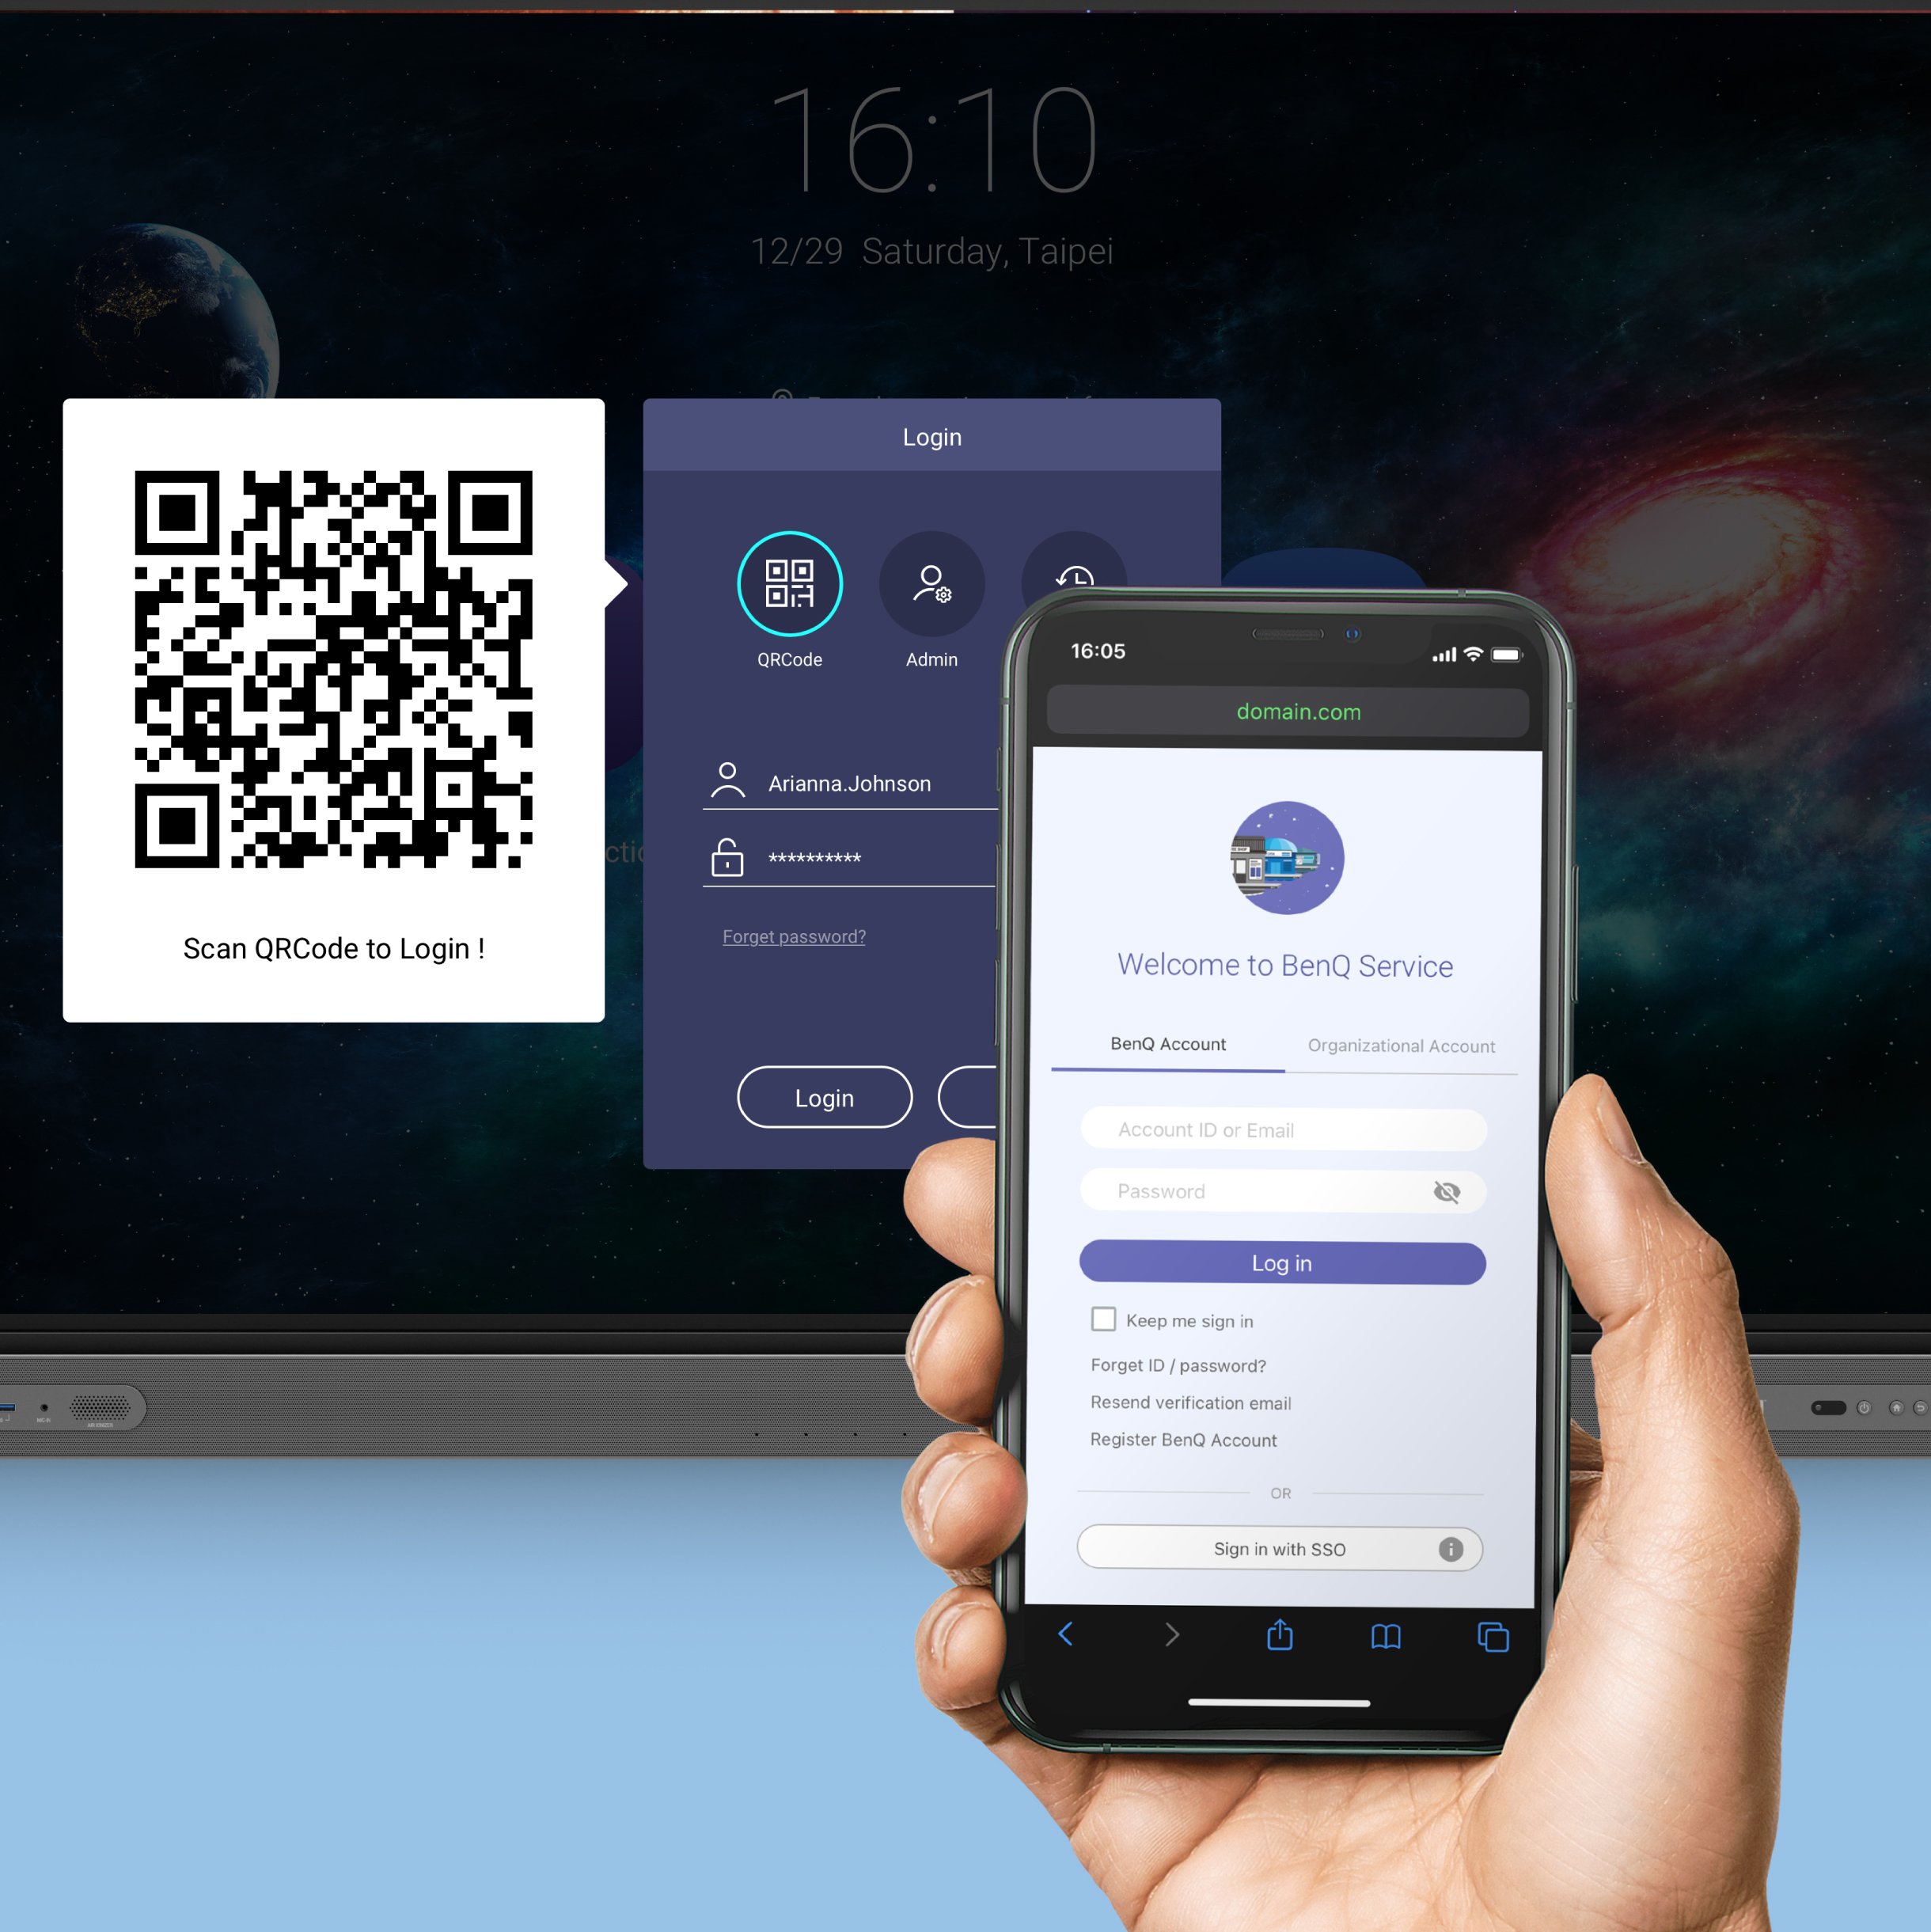 Log in by tapping NFC card or scanning a QR code.